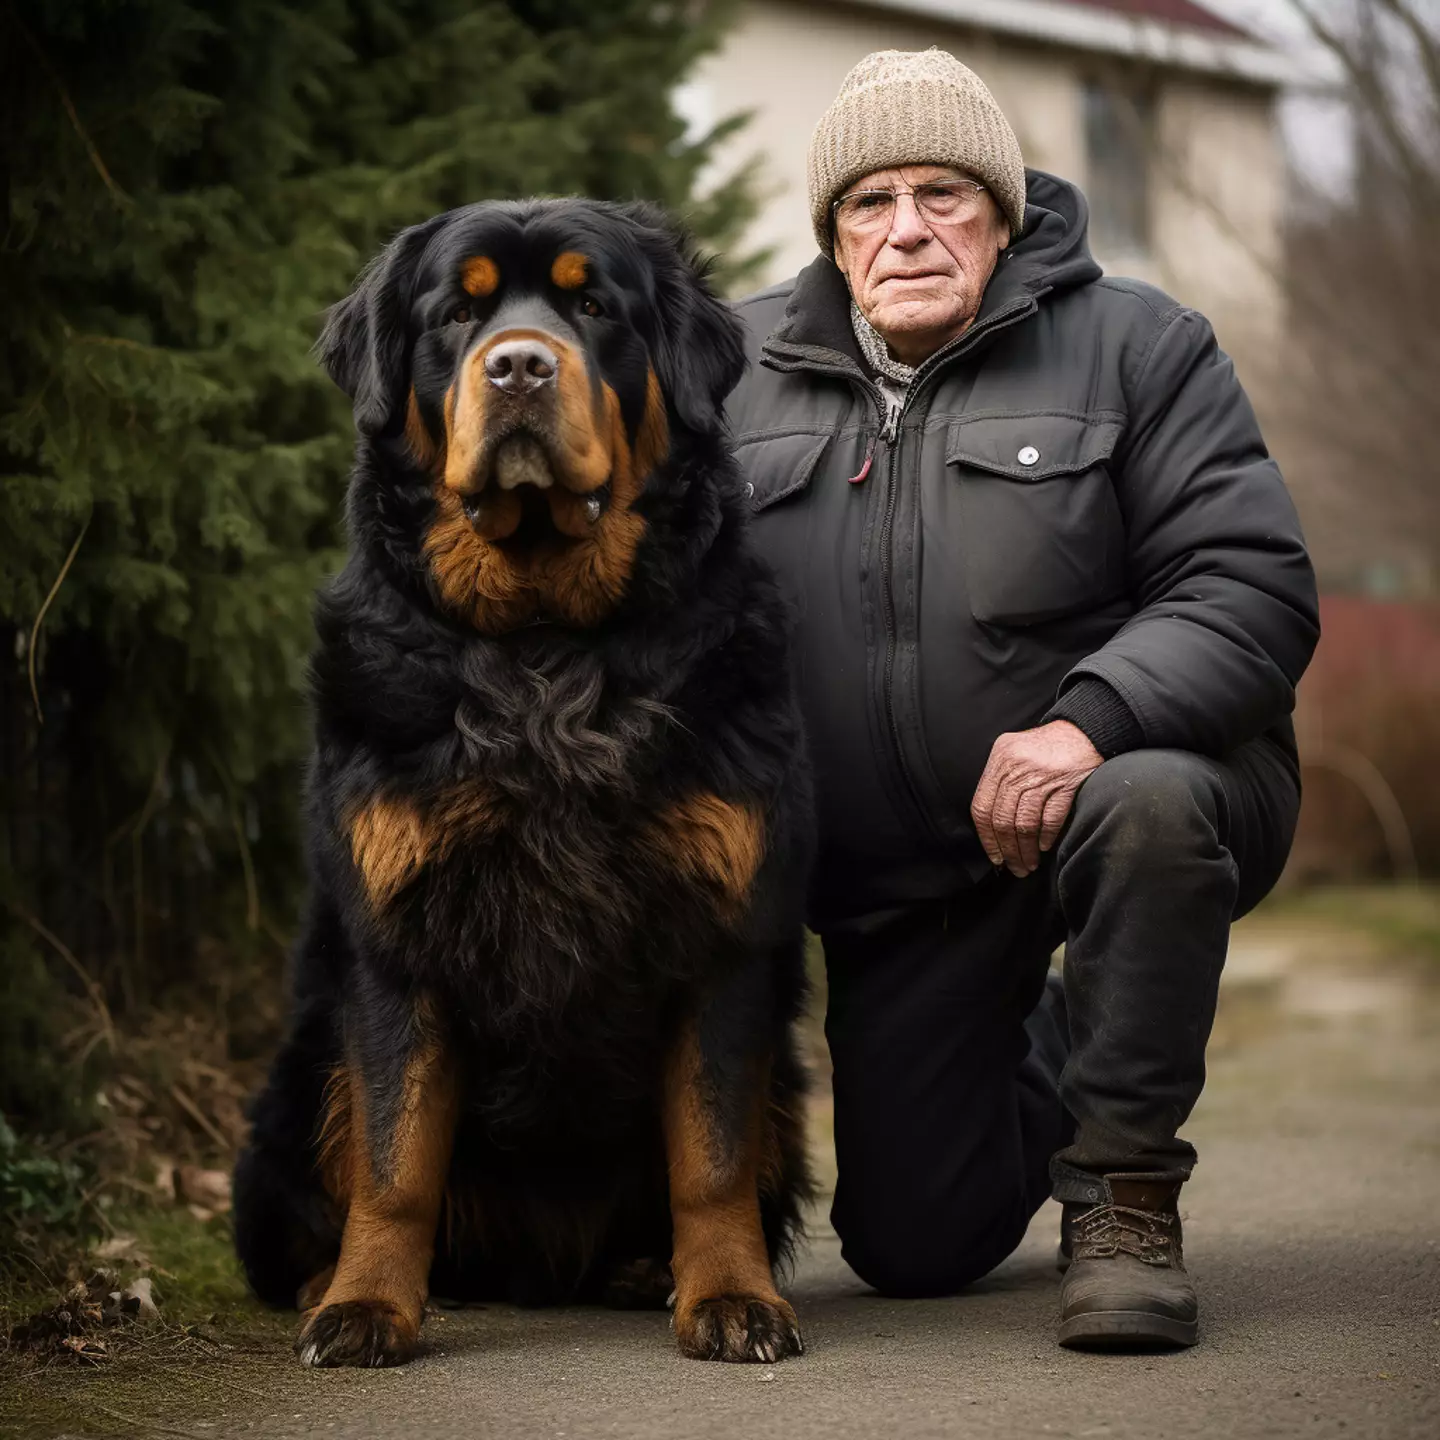 The Rottweiler and its owner actually look pretty sweet.